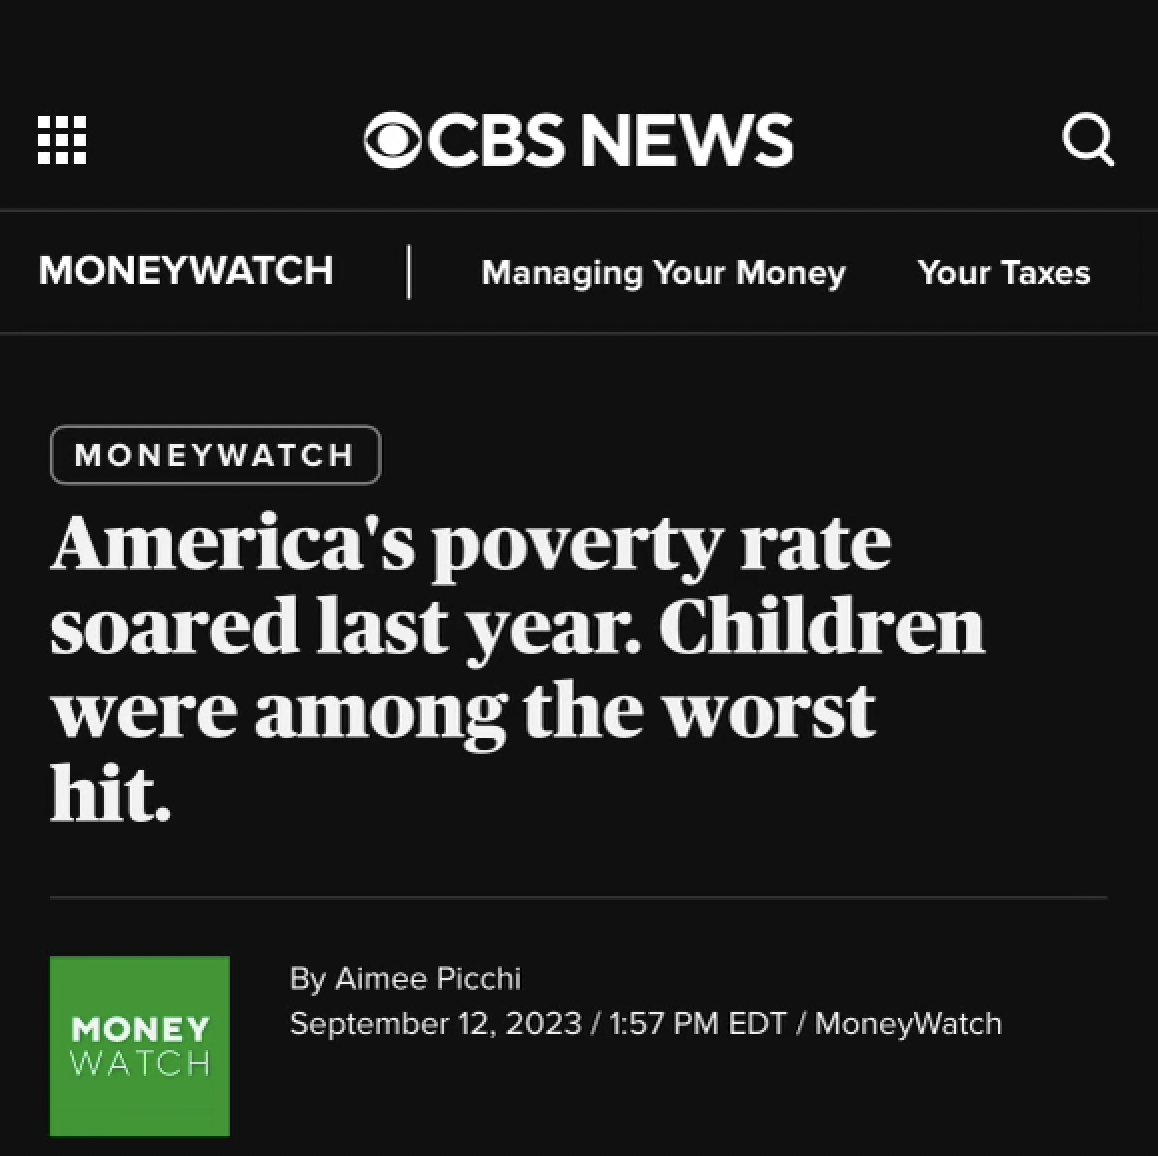 Maybe instead of paying the world's richest man another $52 Billion, we could, idk, tax billionaires and billion dollar corporations to stop the persistent exploitation of tens of millions of Americans, particularly children?